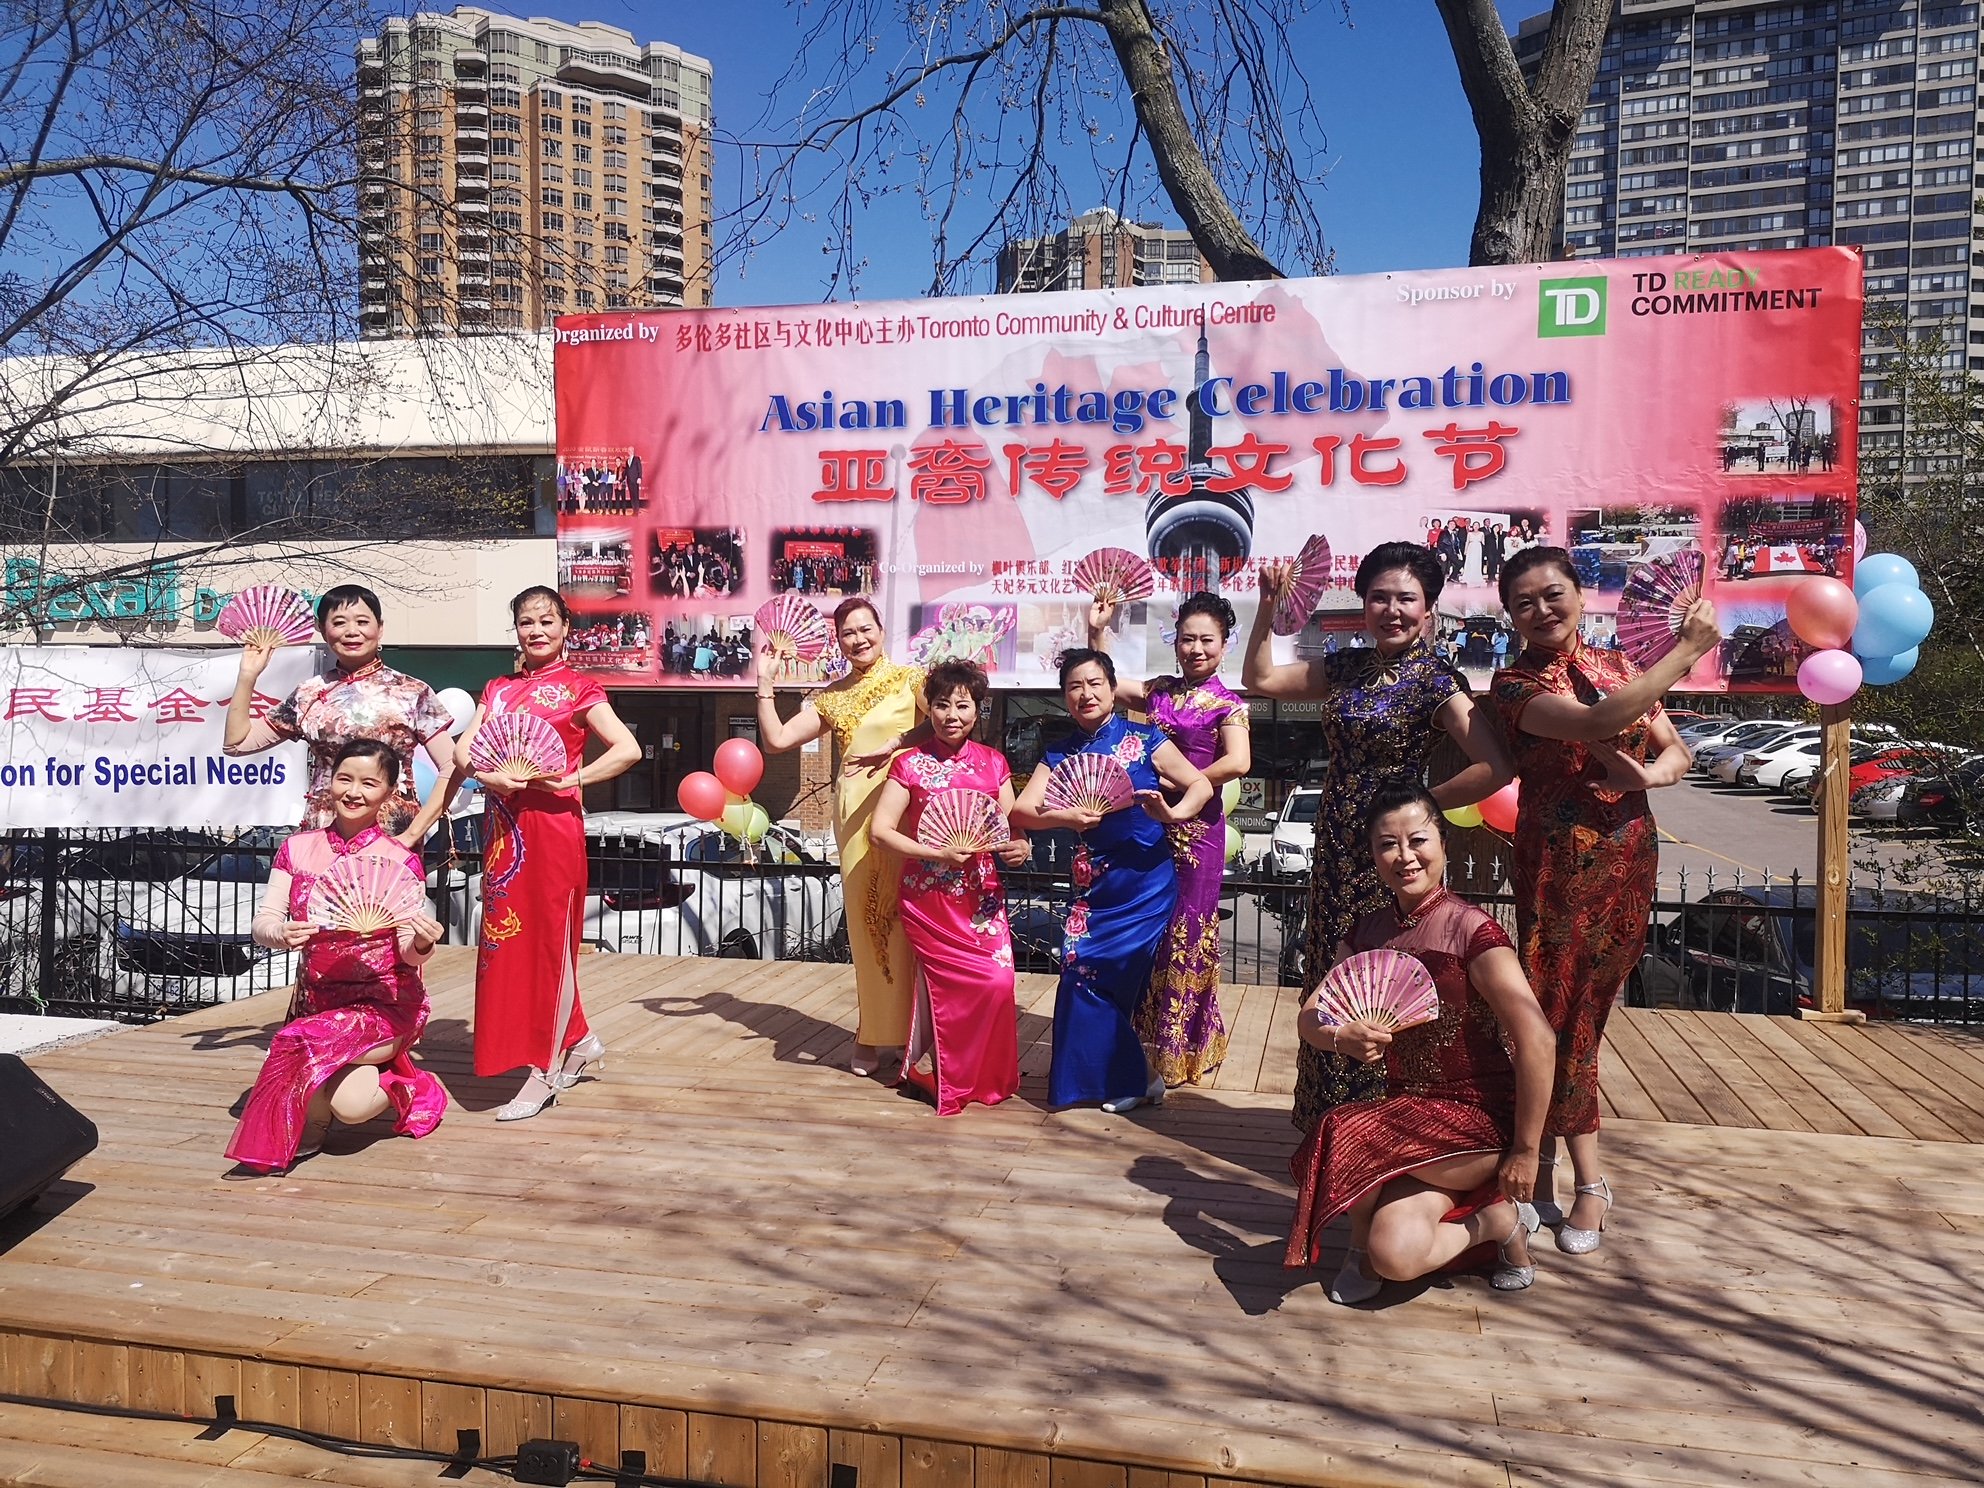  A group of charming Chinese ladies dancing in traditional Cheongsam outfits. Cheongsam, also known as qipao, is a close-fitting Chinese women’s dress that has existed for over 100 years. (Yu Chen/Ruby Art Association) 